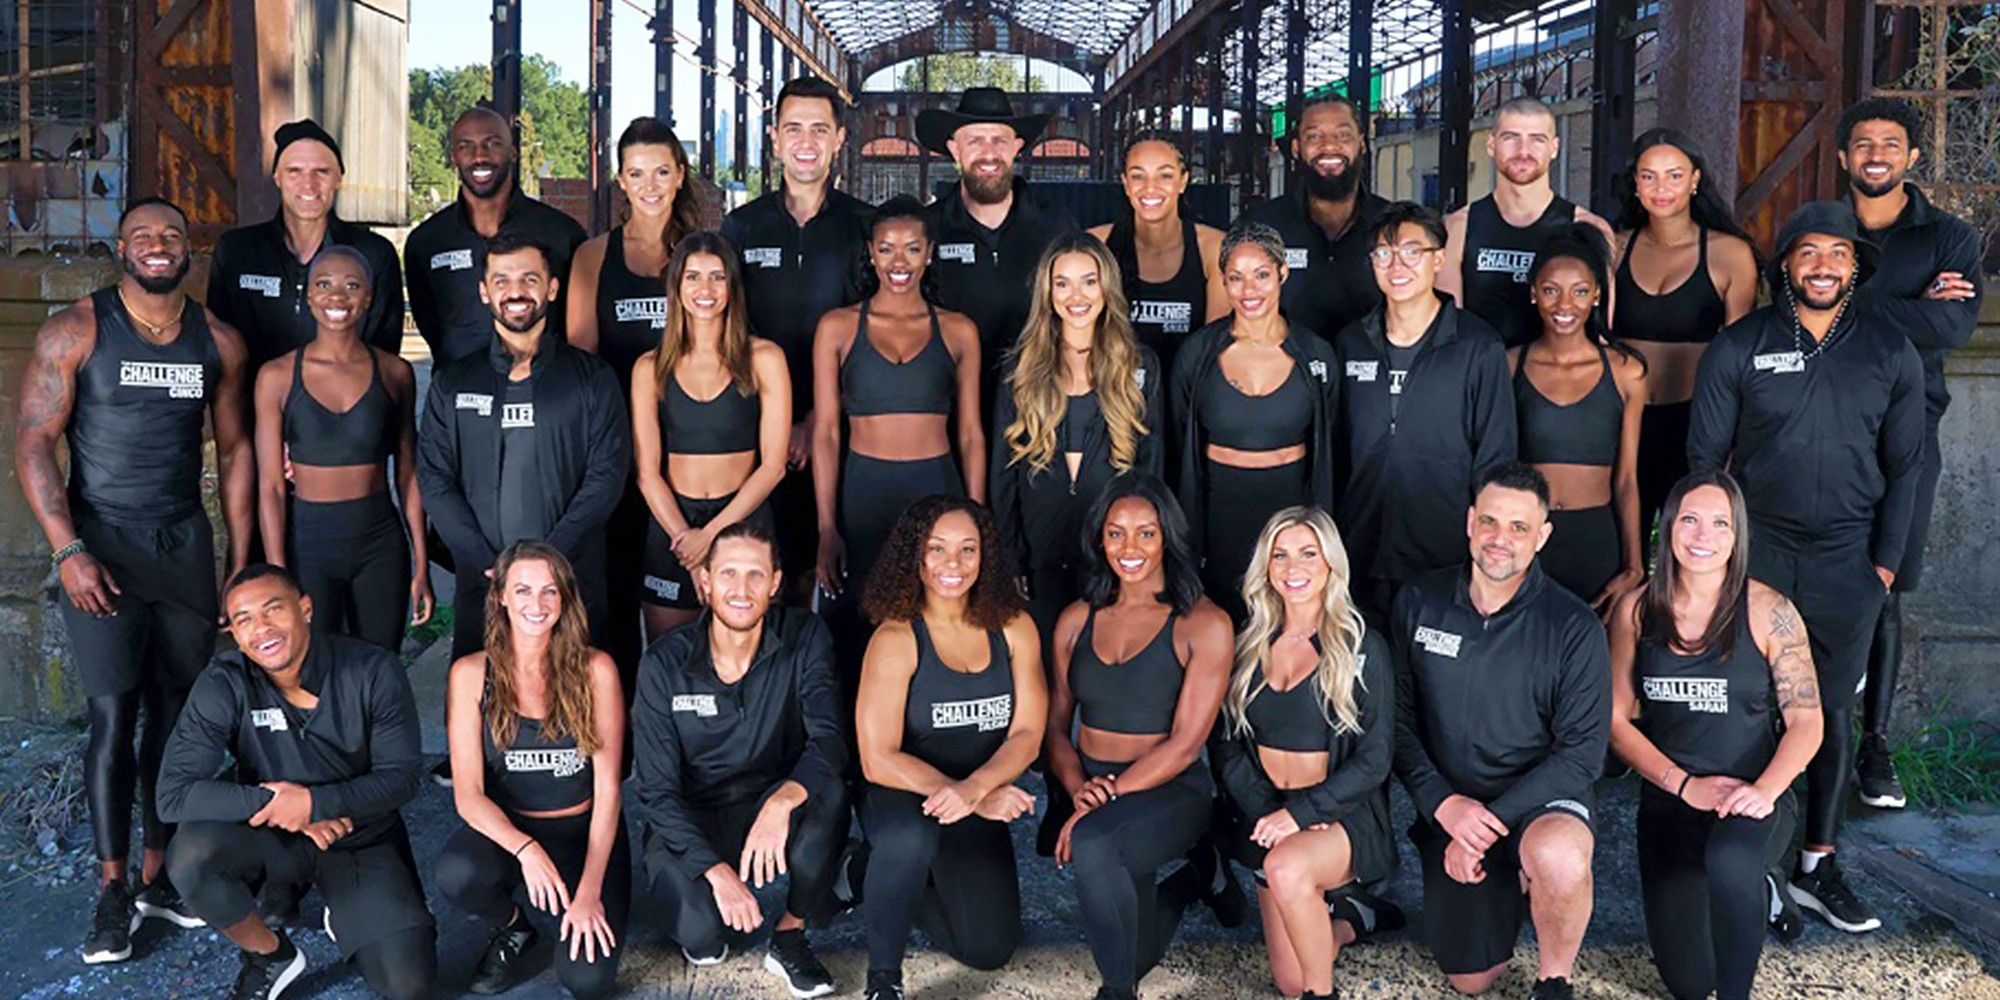 The Challenge USA: Big Brother Cast Members Reveal Their Secret Talents